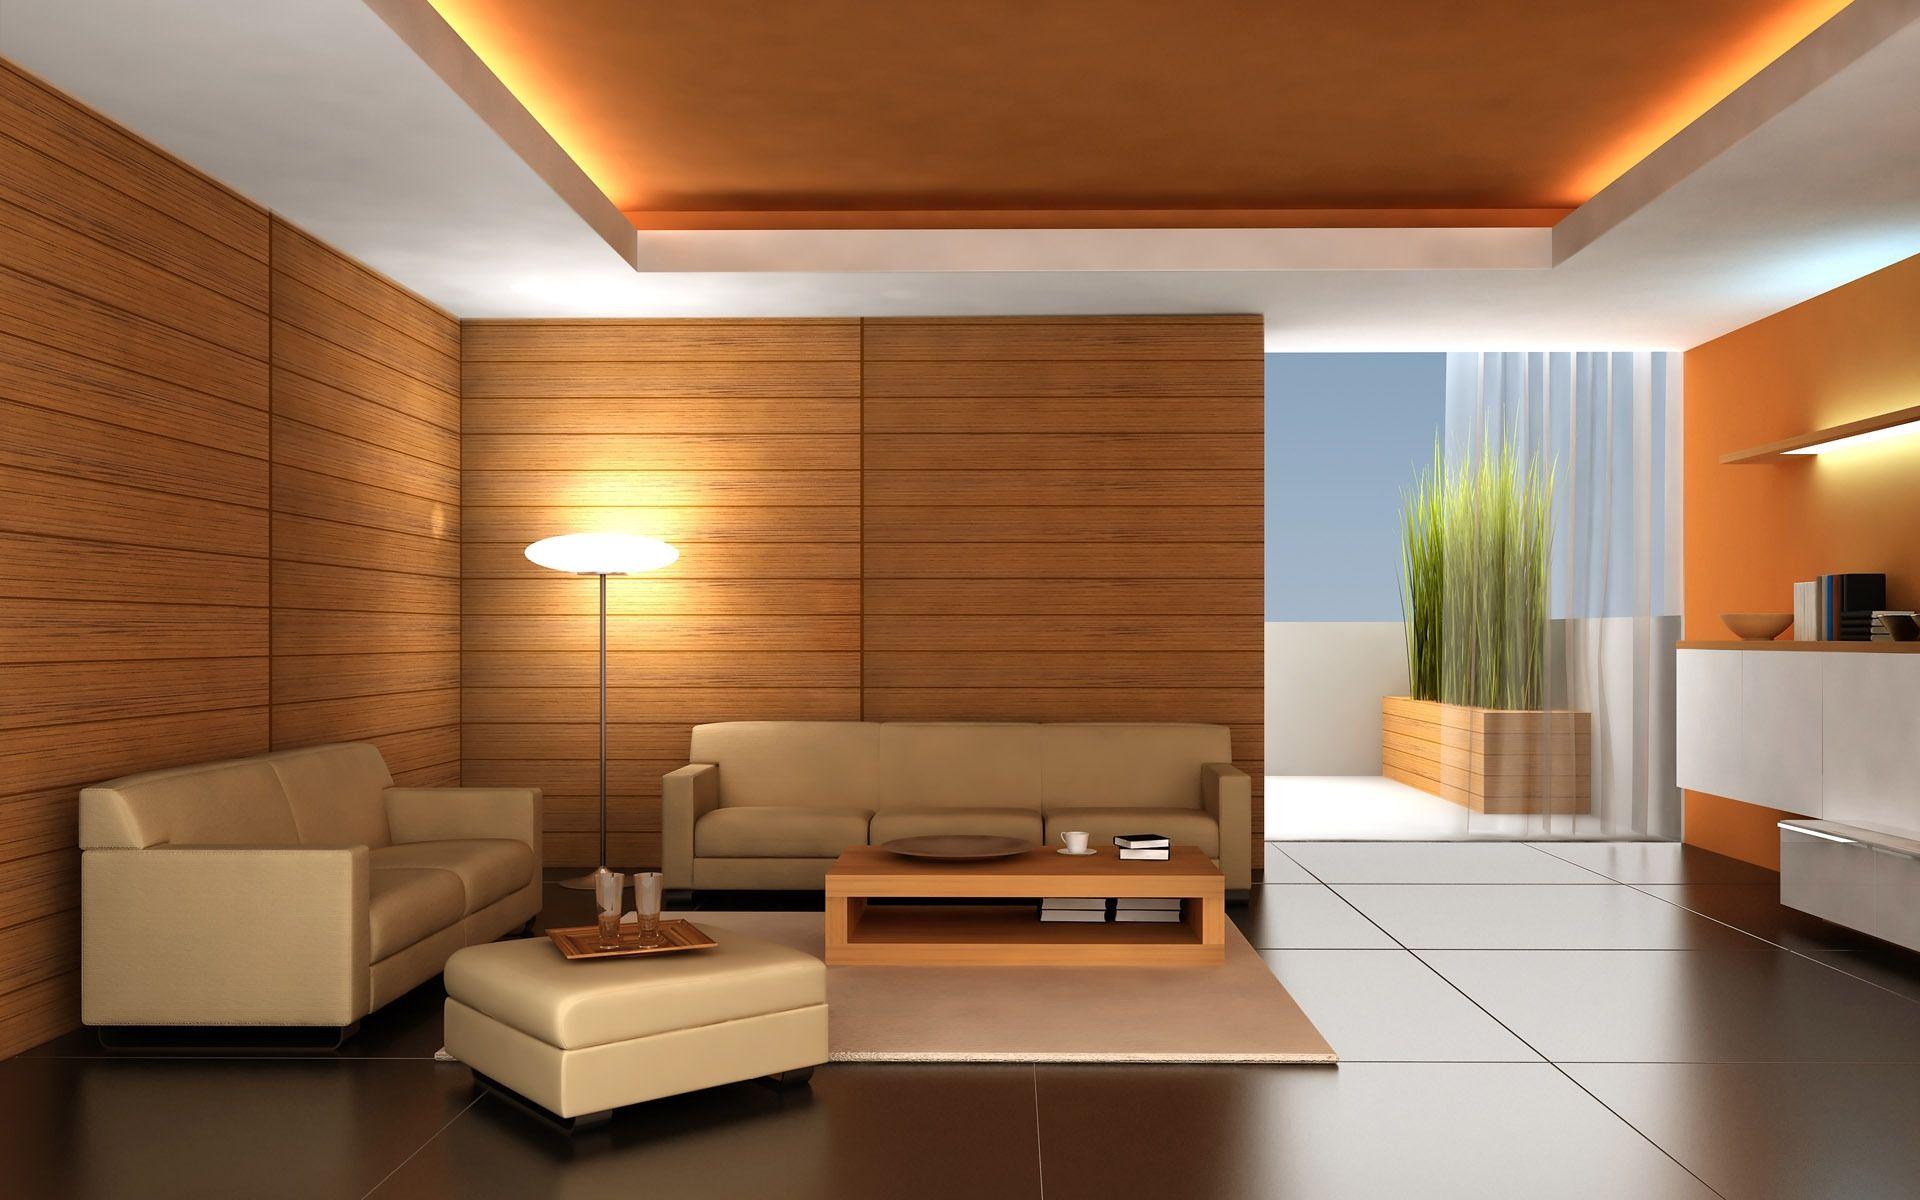 Interior Design Styles Wallpaper, High Quality Background